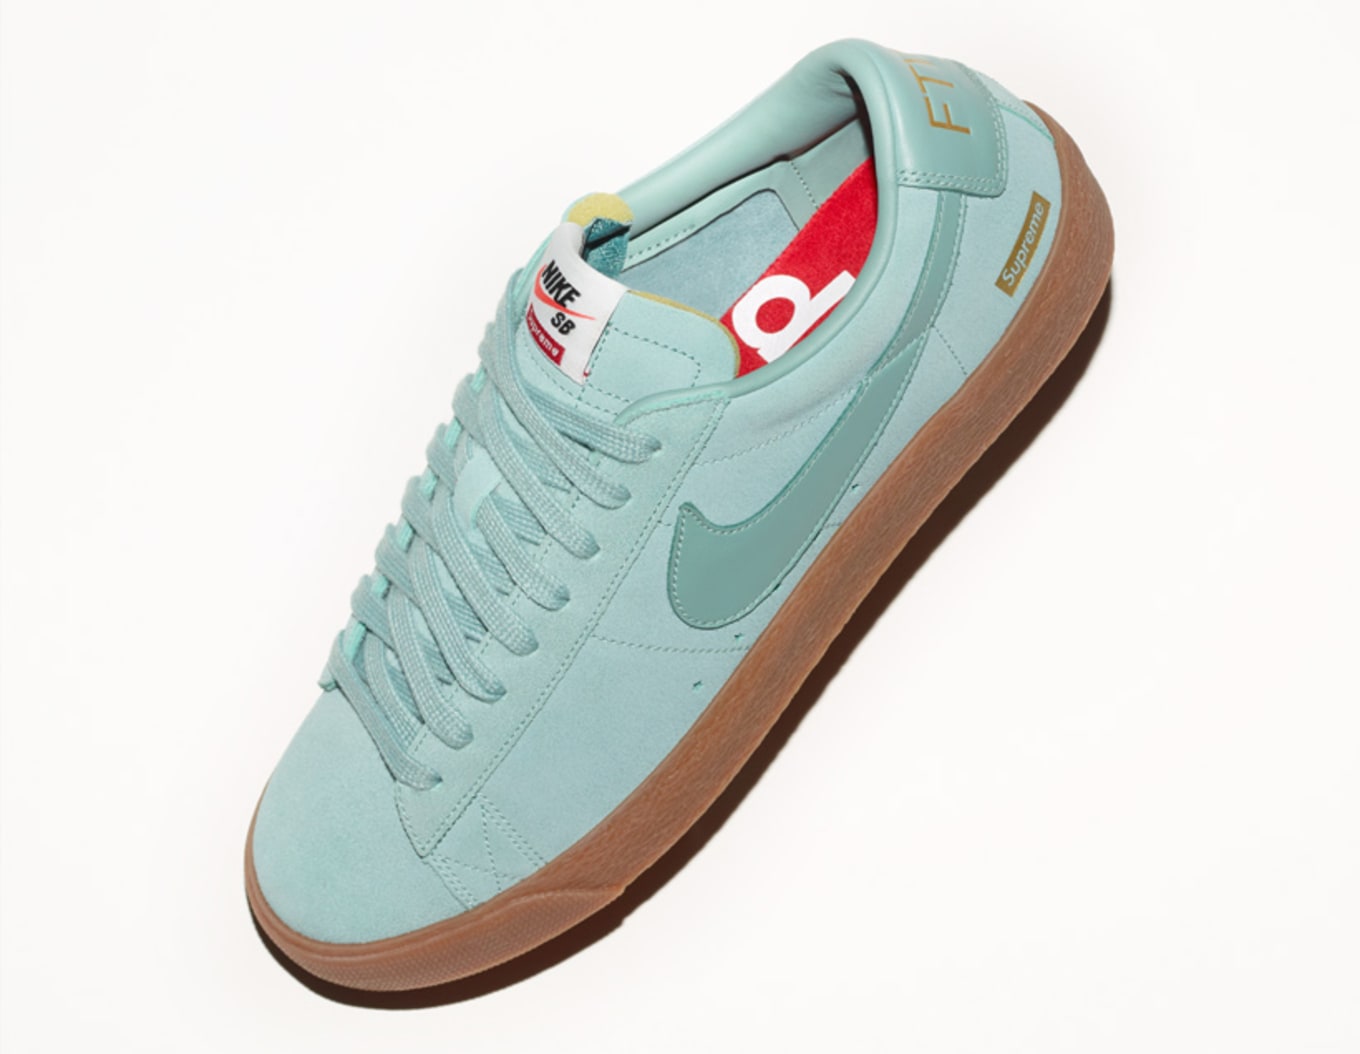 Supreme Nike Blazer Low Online Release | Sole Collector